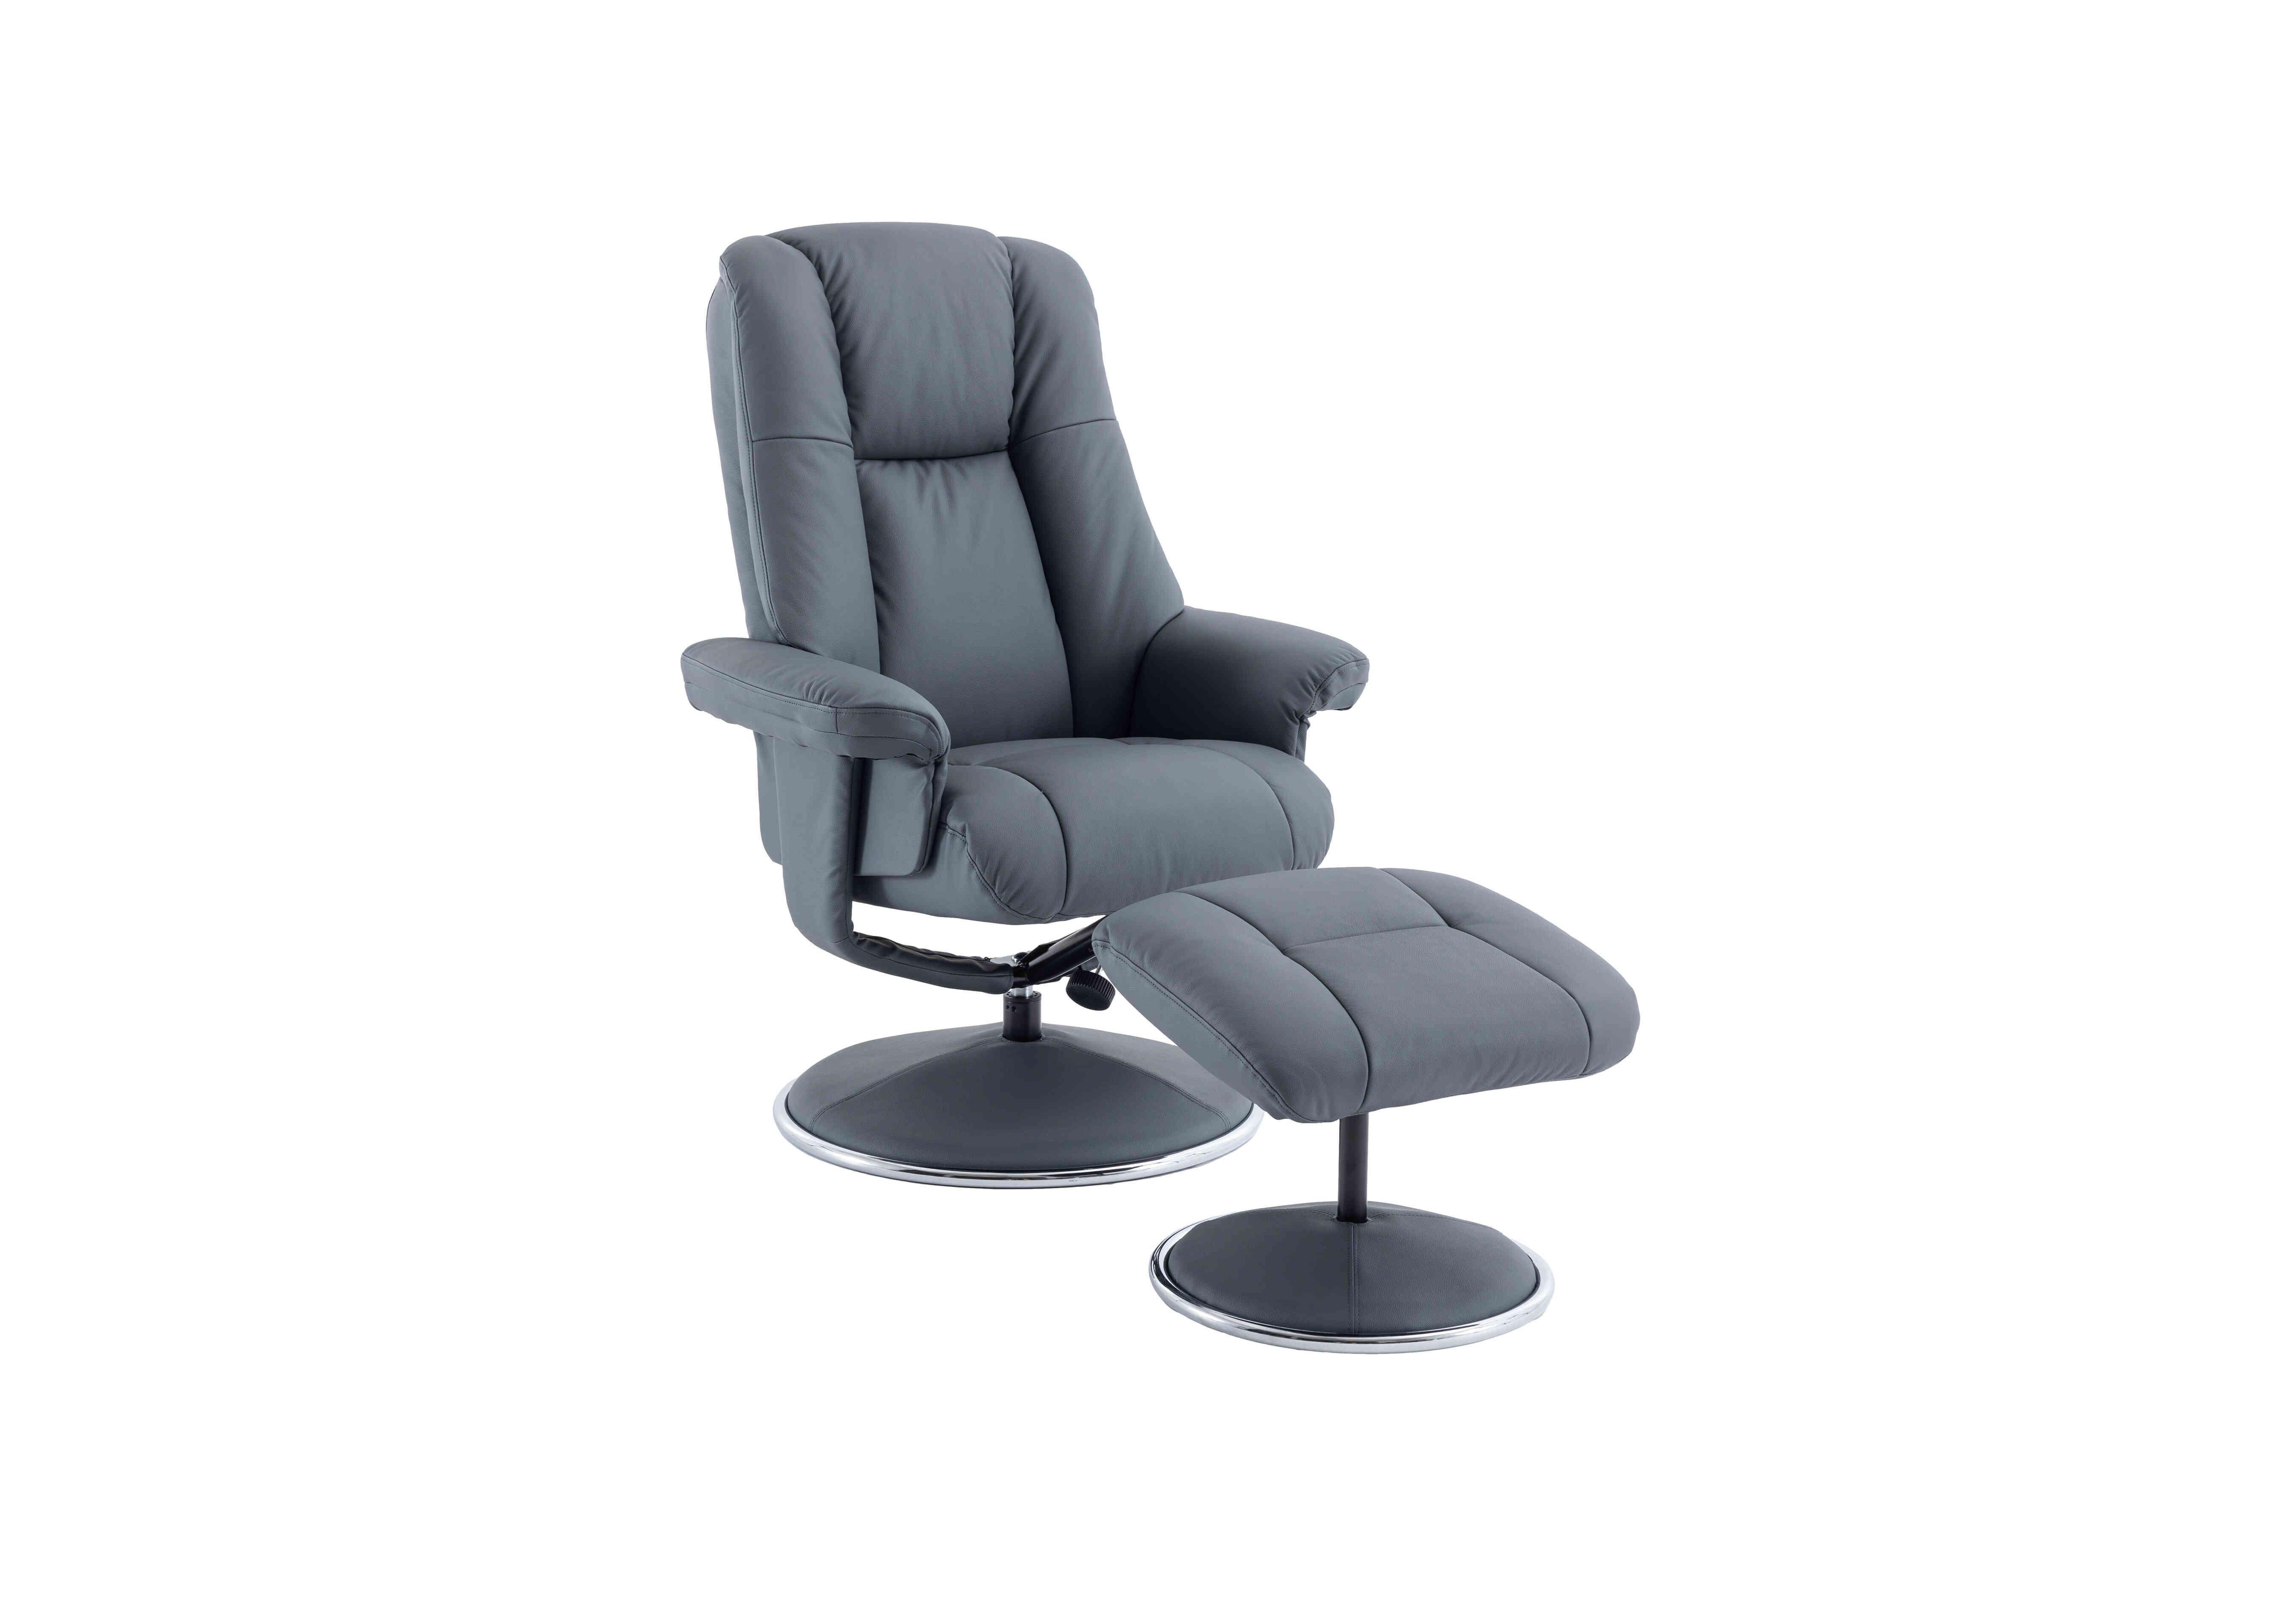 Troyes Leather Look High-Back 360 Swivel Chair and Footstool in Petrol Blue on Furniture Village